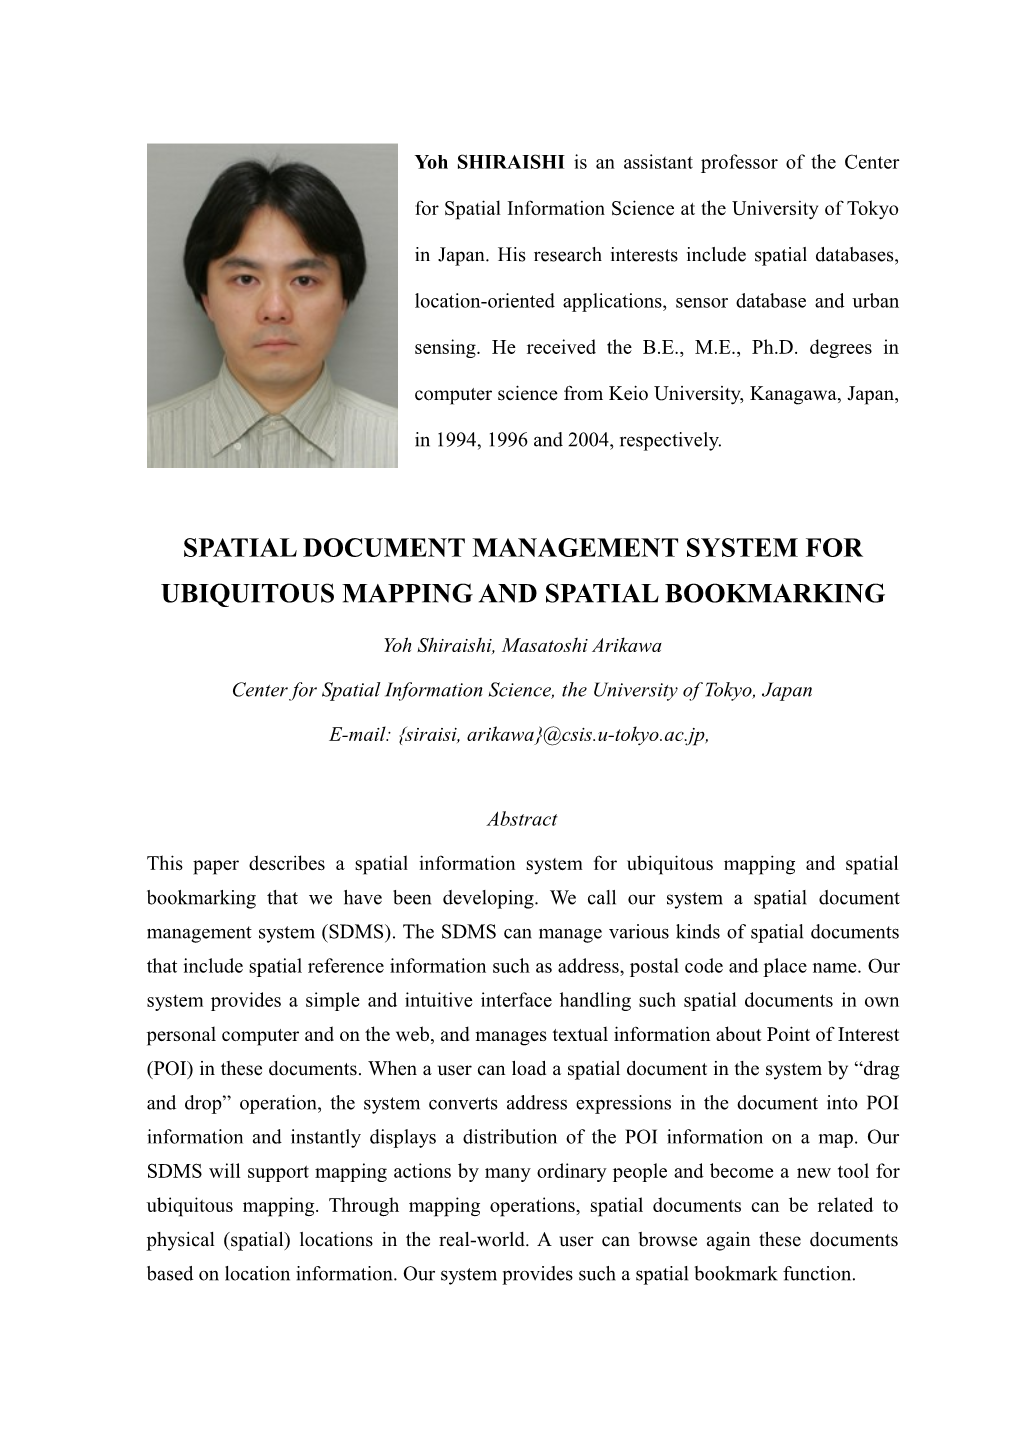 Spatial Document Management System for Ubiquitous Mapping and Spatial Bookmarking